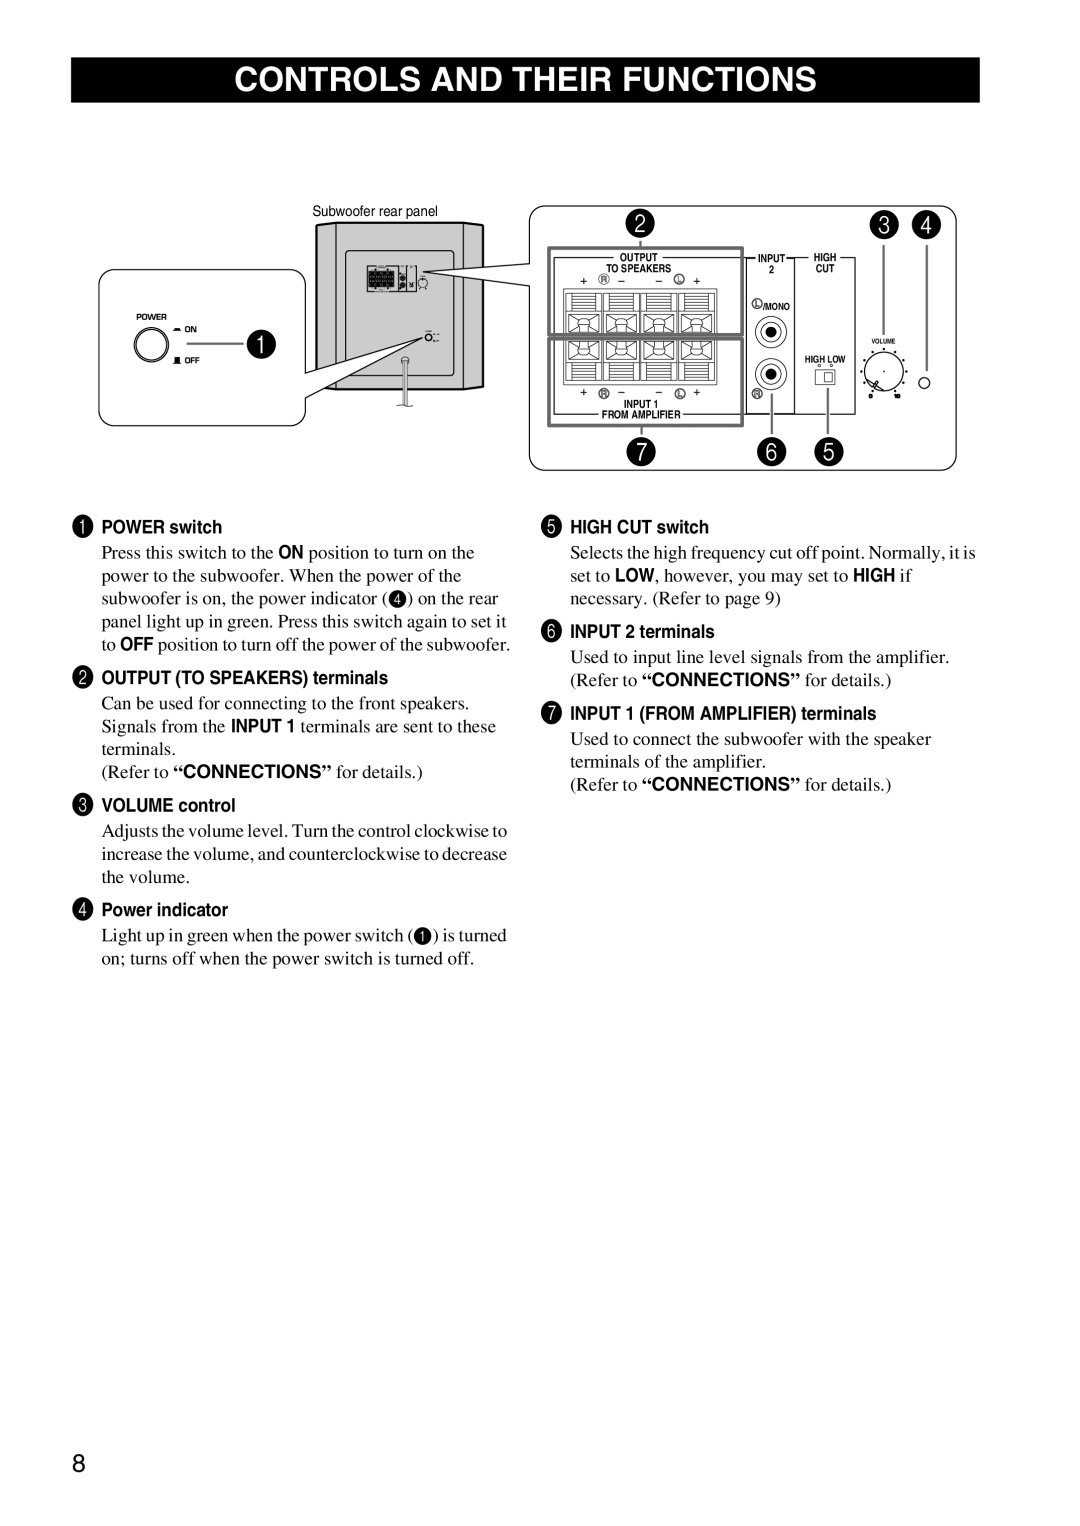 Yamaha HTR-5940 AV owner manual Controls And Their Functions, 1POWER switch, 2OUTPUT TO SPEAKERS terminals, 3VOLUME control 